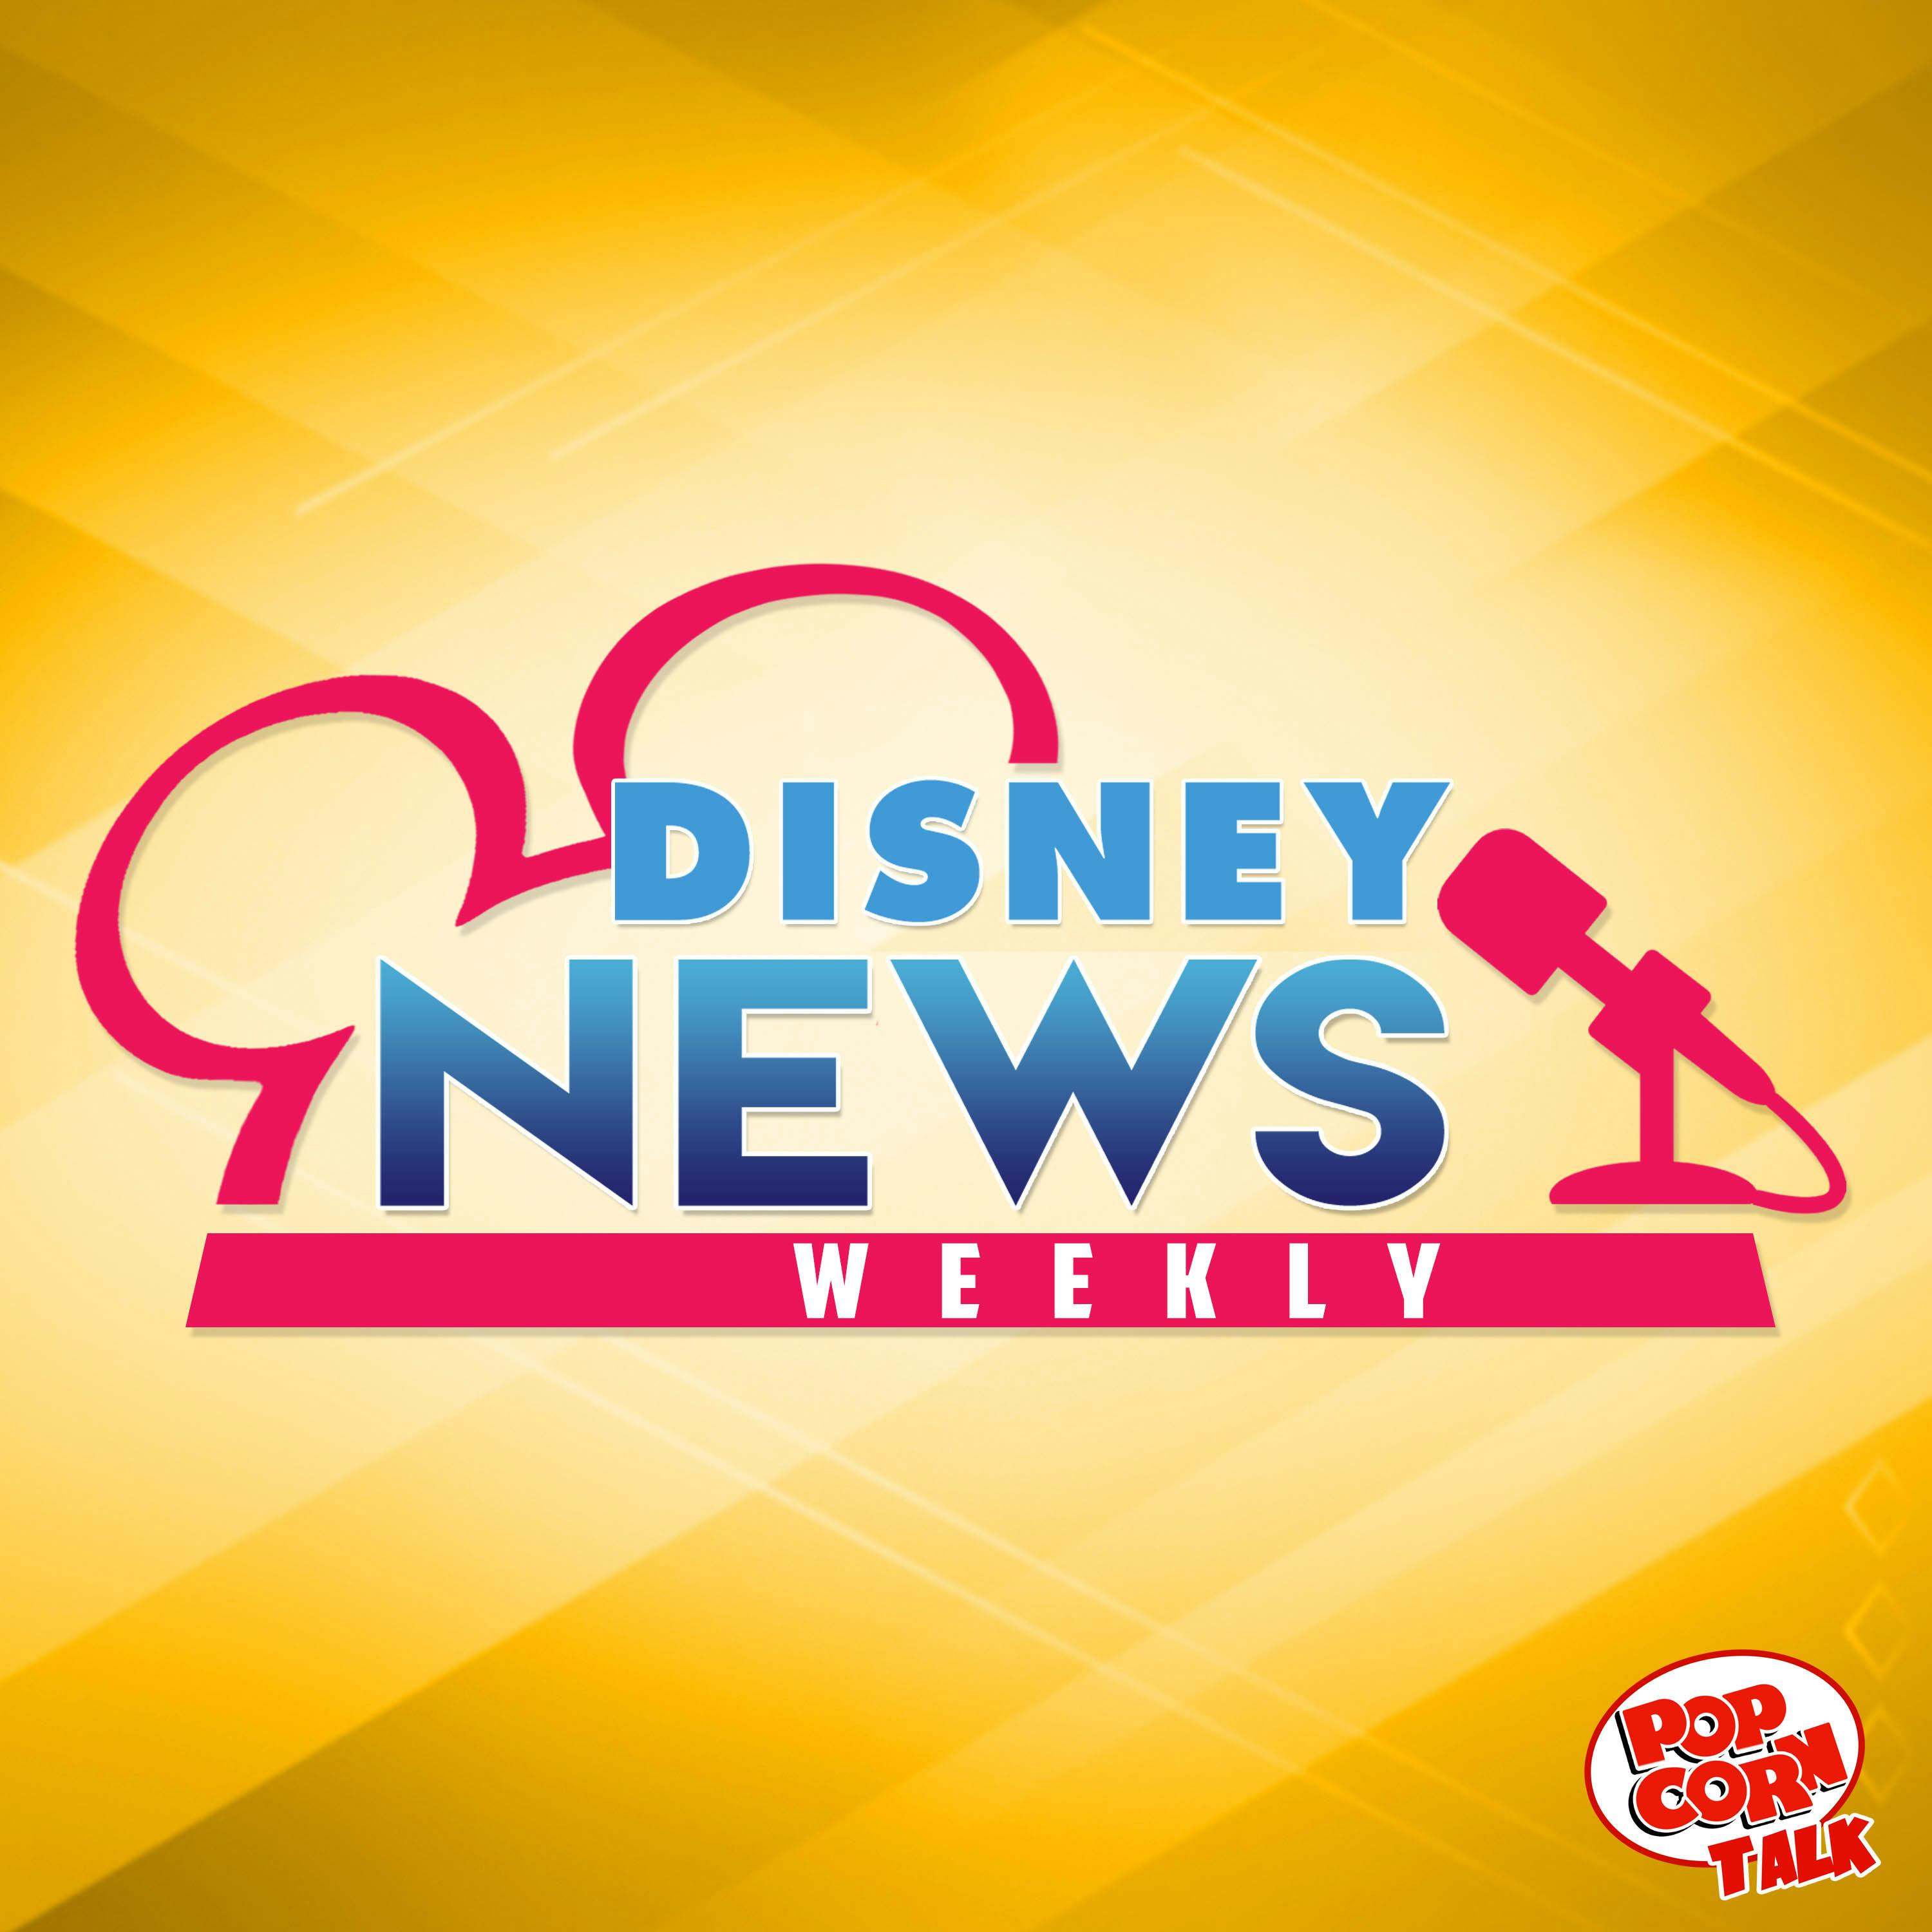 Prince Charming Movie, Maleficent 2 Casting, & More! – Disney News Weekly 110